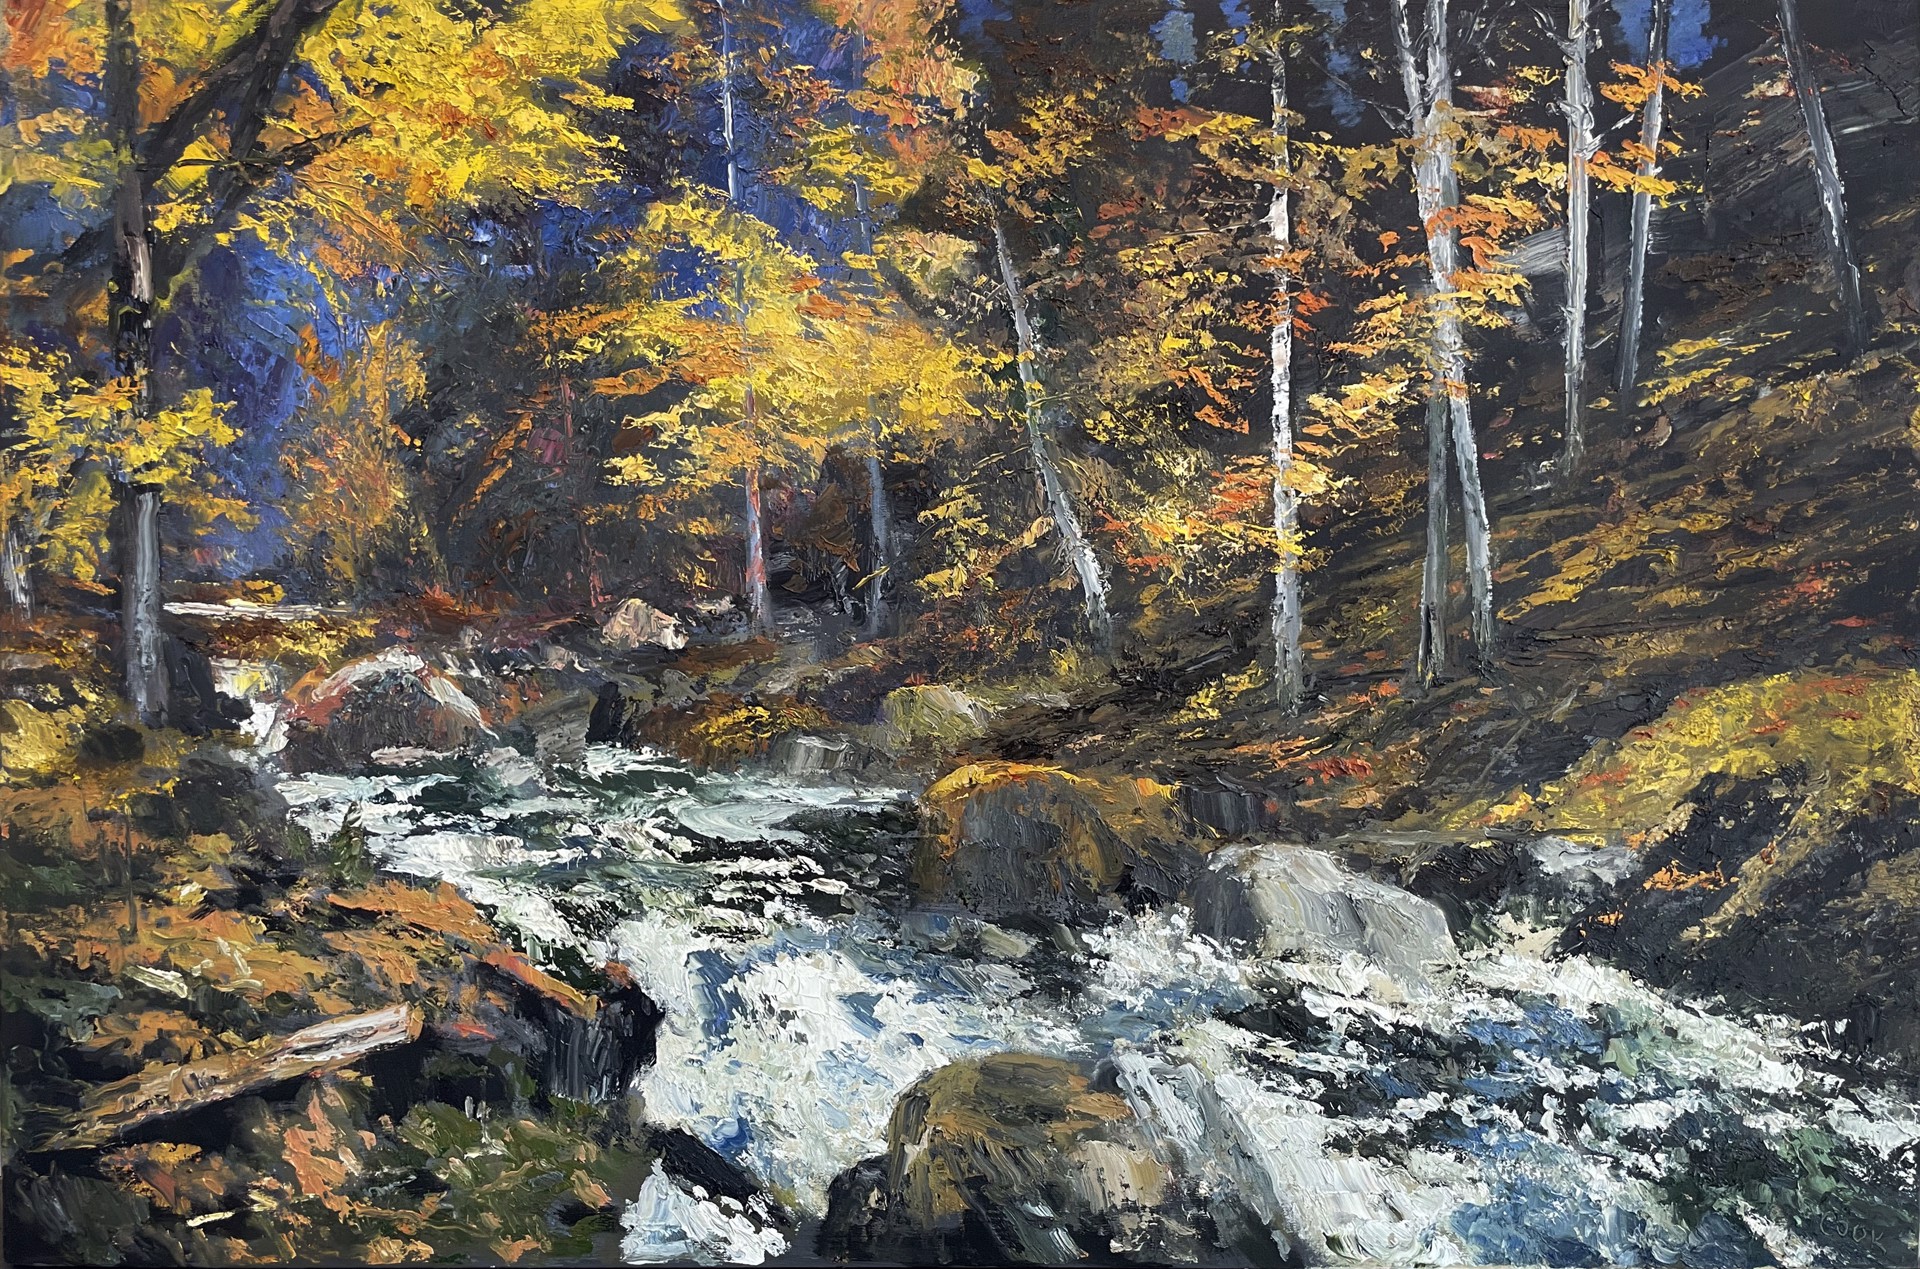 Mission Creek - Autumn by James Cook